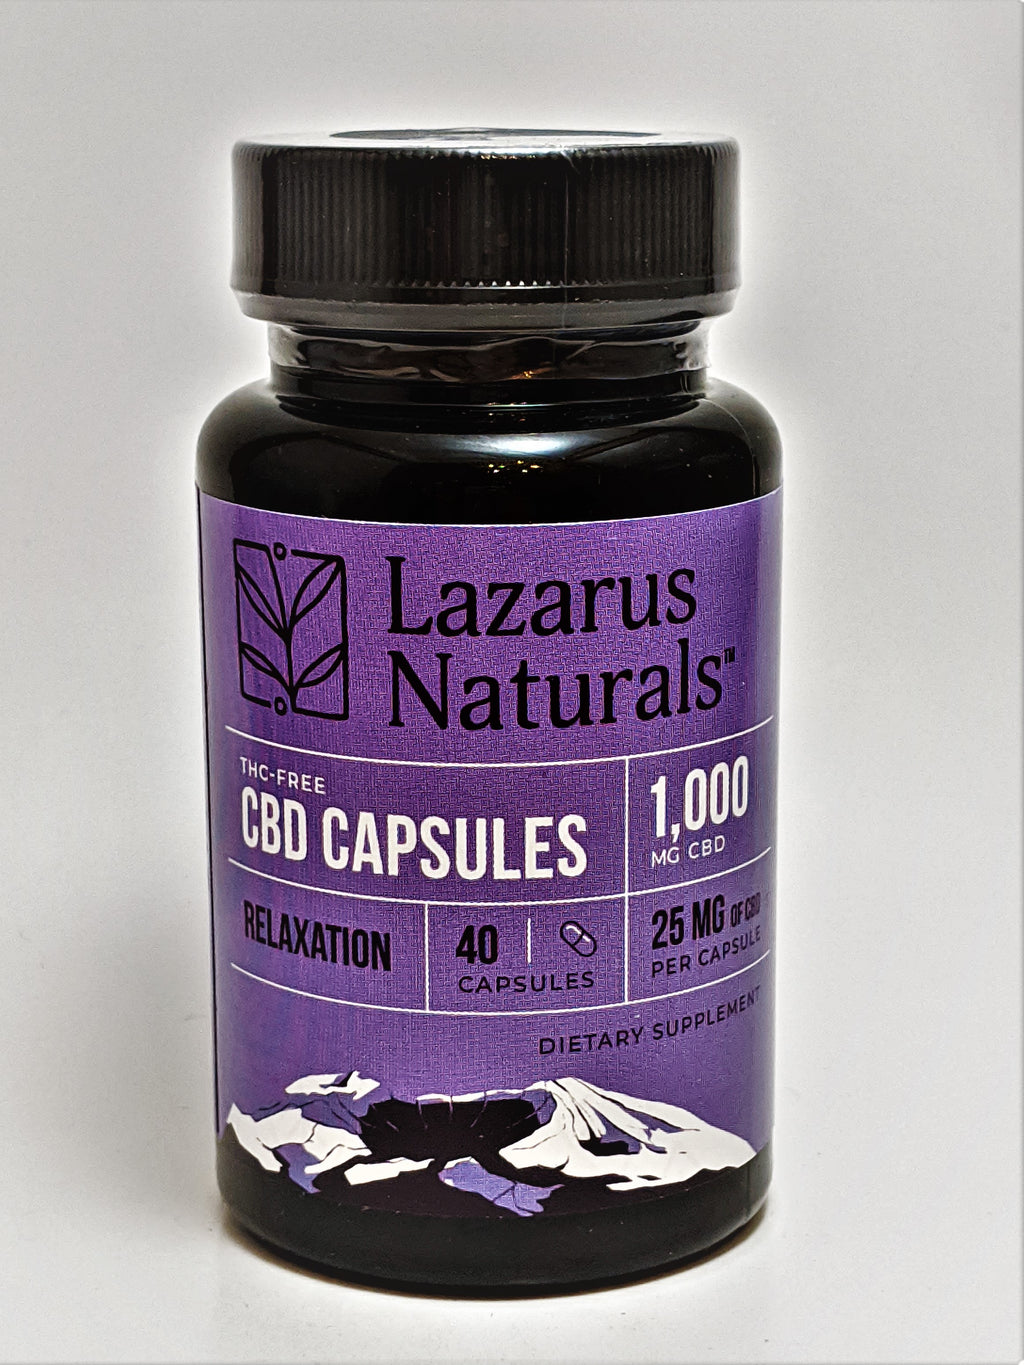 Lazarus Relaxation Blend CBD Isolate 25 mg capsules, 40 Count Bottle (1,000 mg CBD) - CBD Central